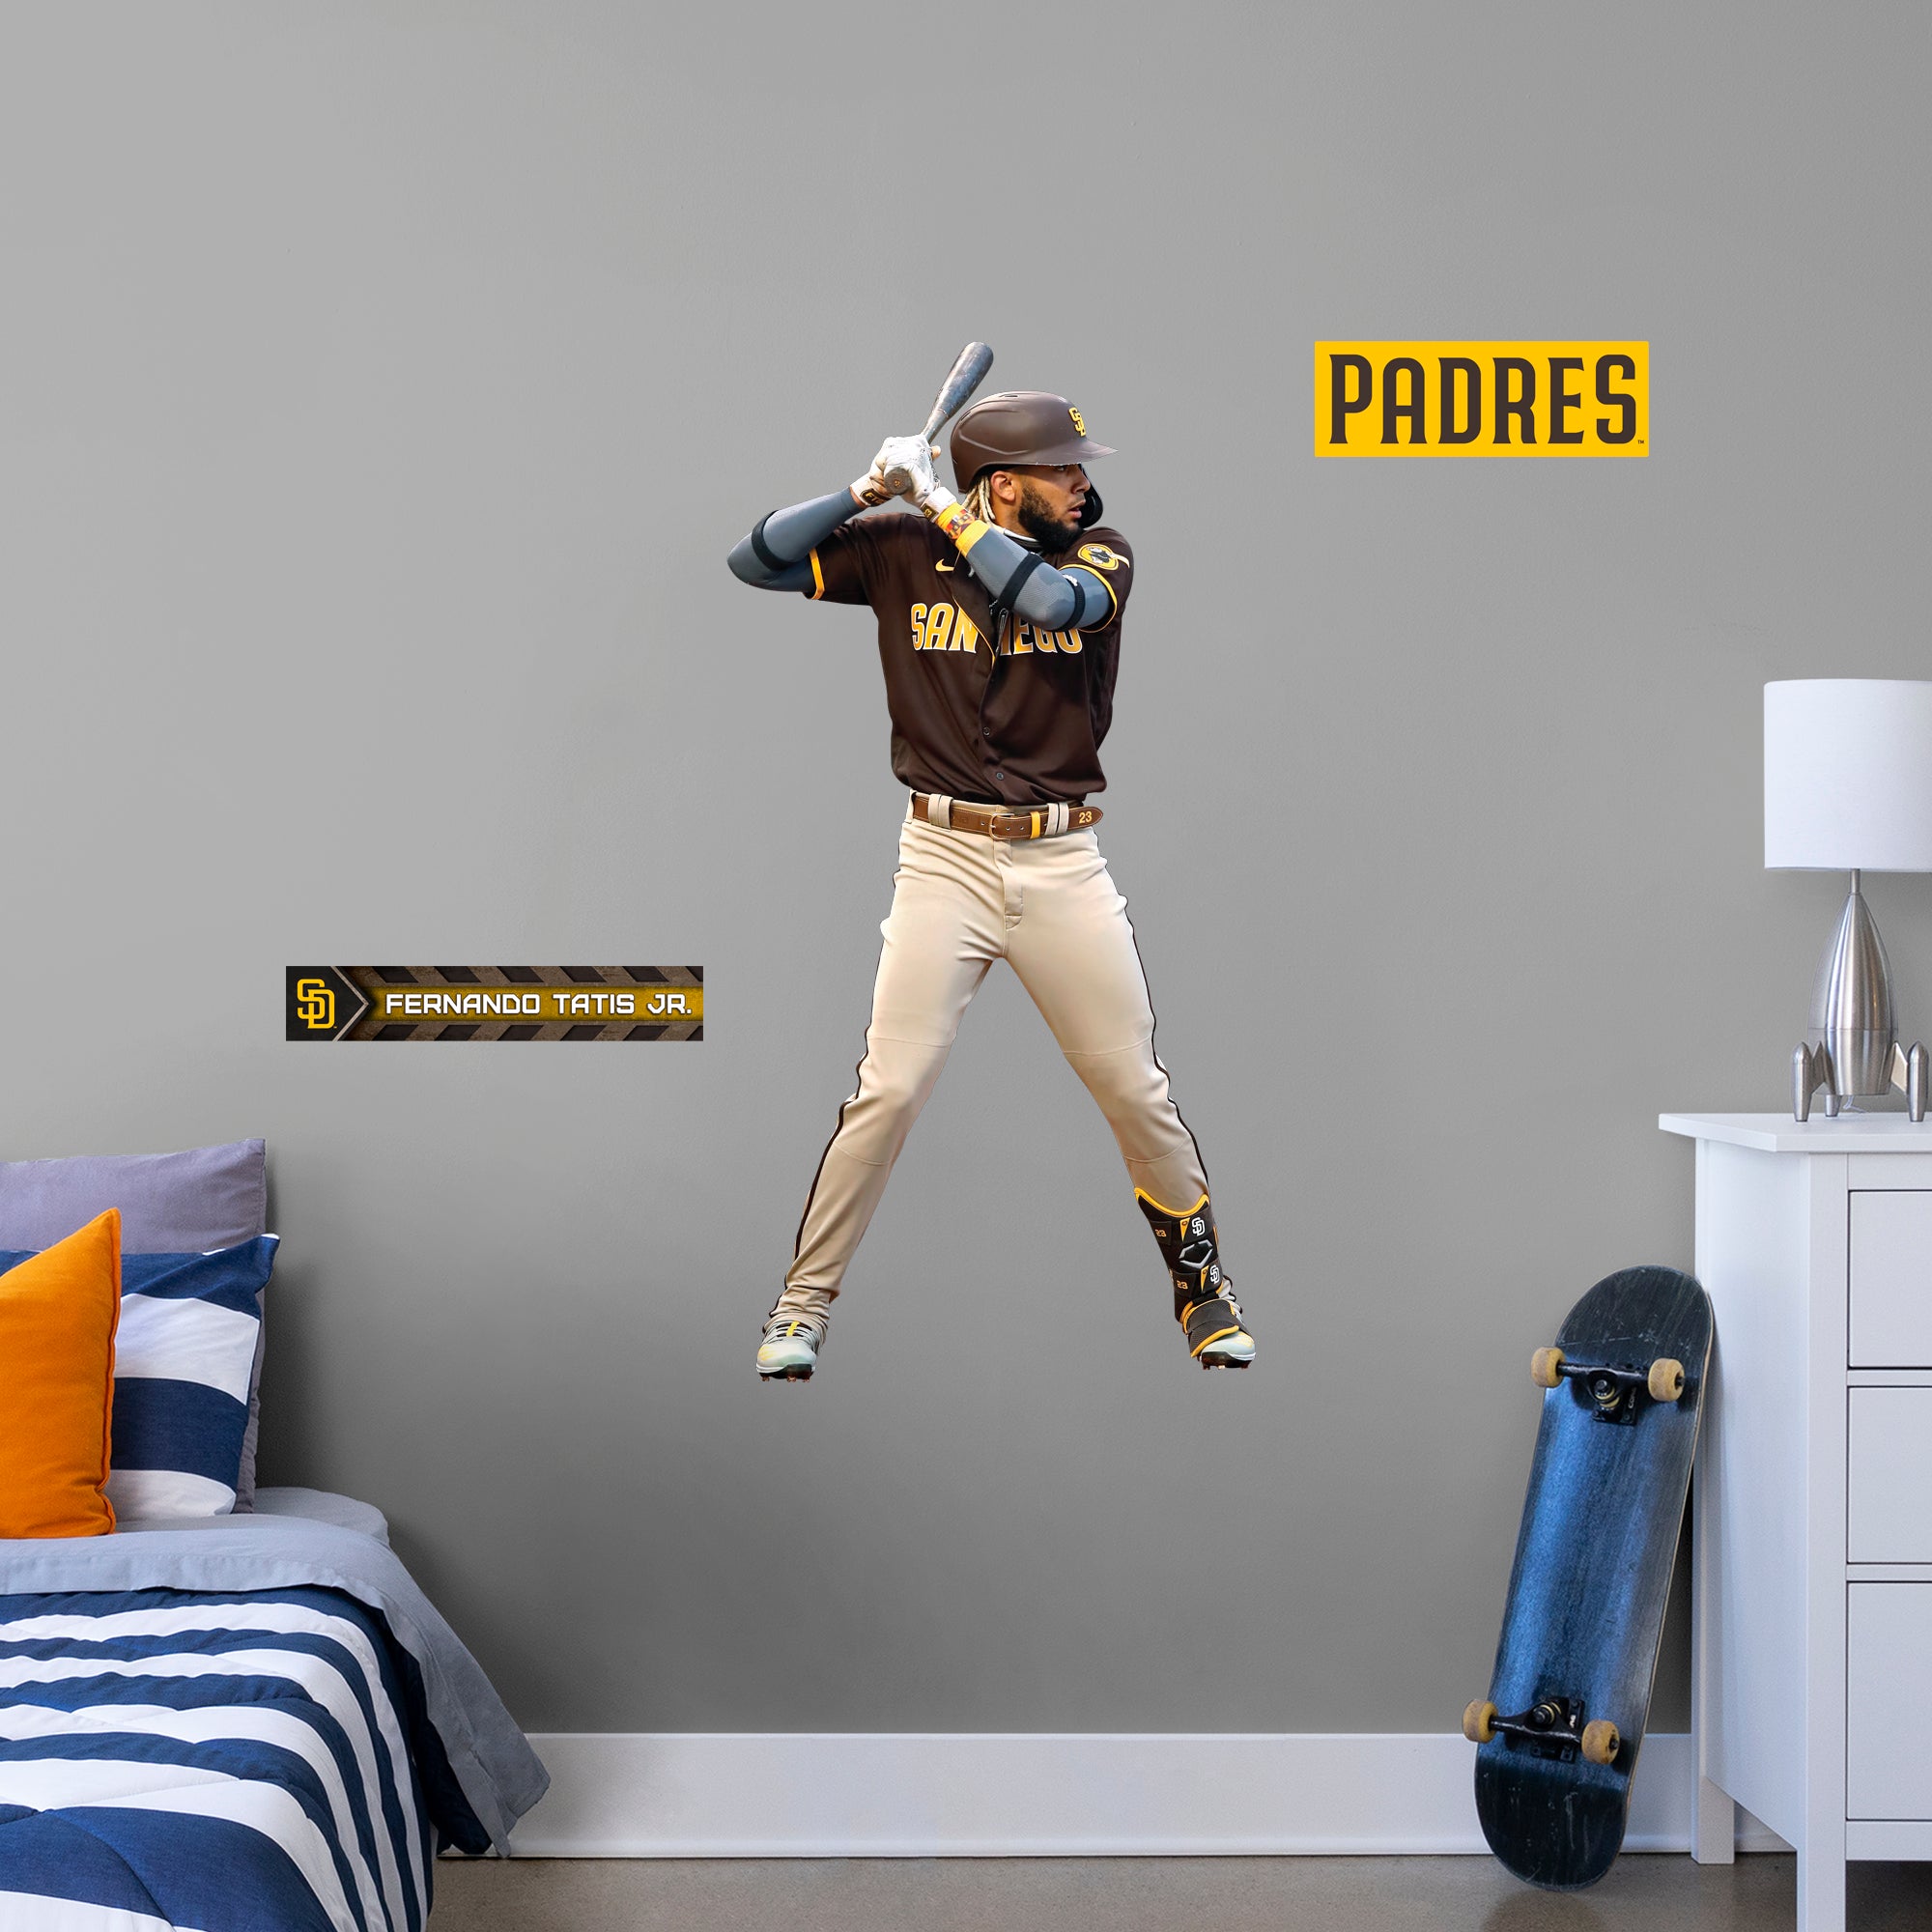 Fernando Tatis Jr for San Diego Padres: RealBig Officially Licensed MLB Removable Wall Decal Giant Athlete + 2 Decals by Fathead